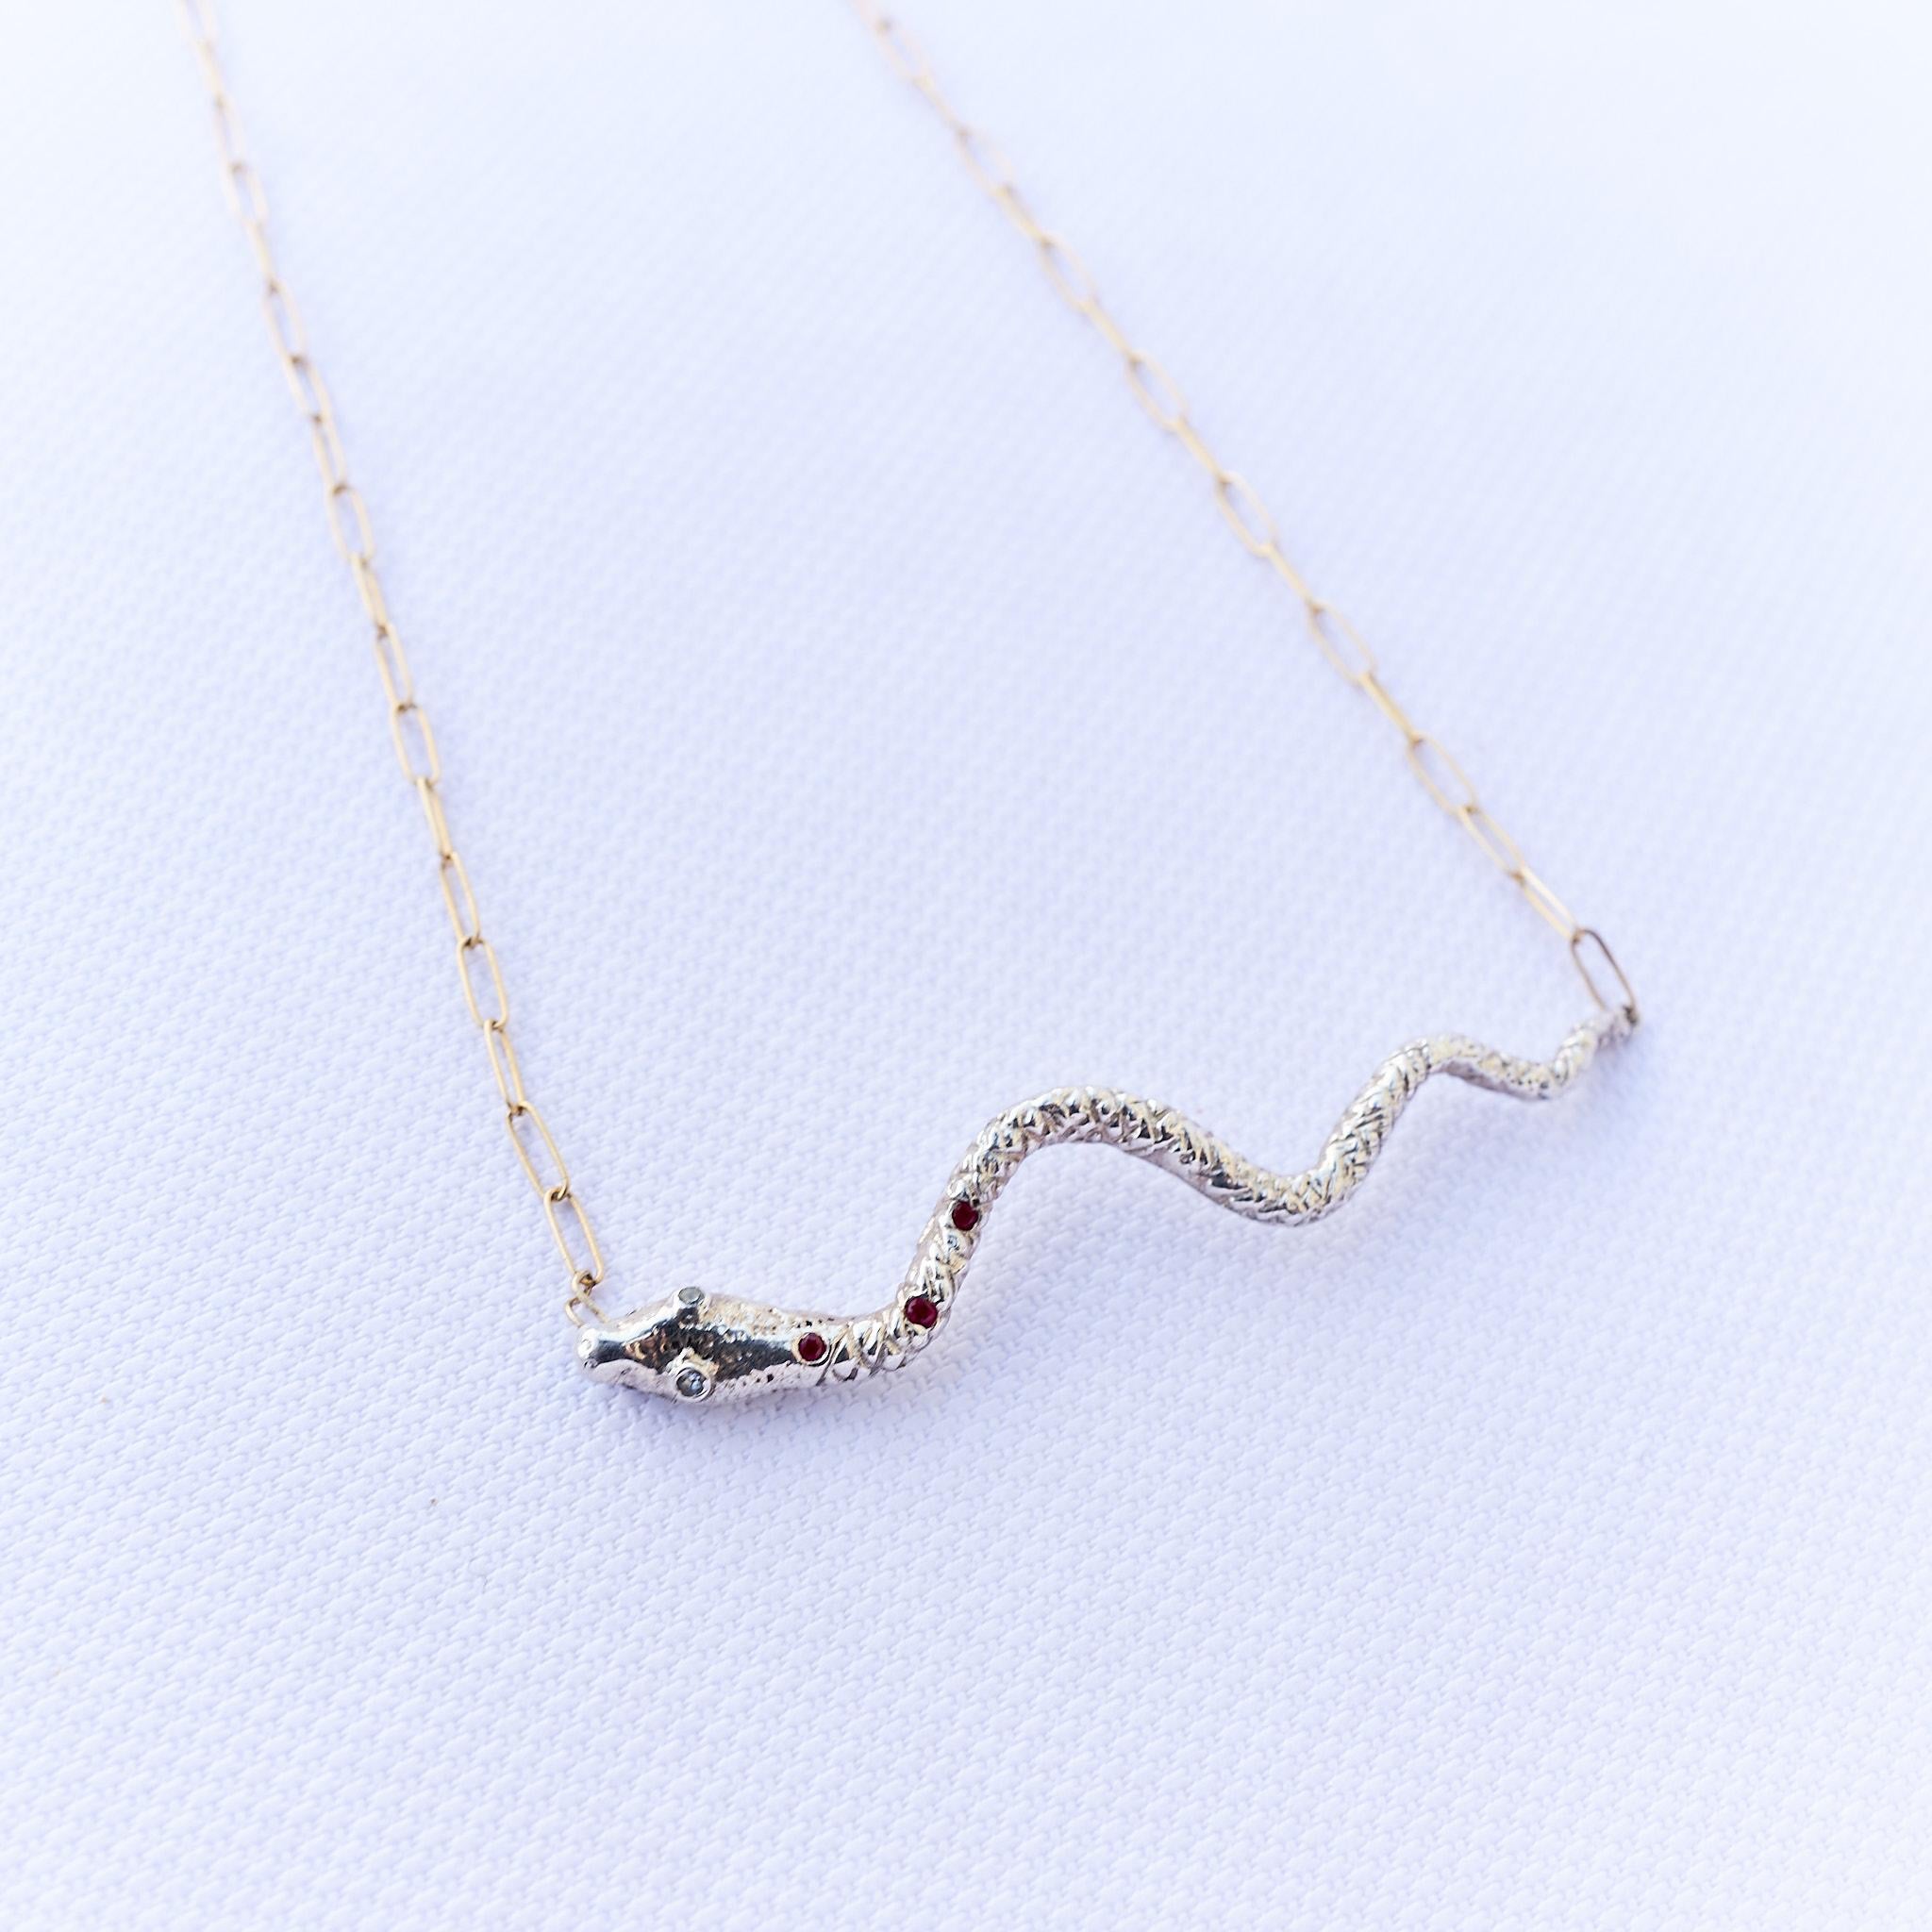 Snake Necklace Silver Ruby Iolite Gold Filled Chain J Dauphin For Sale 3